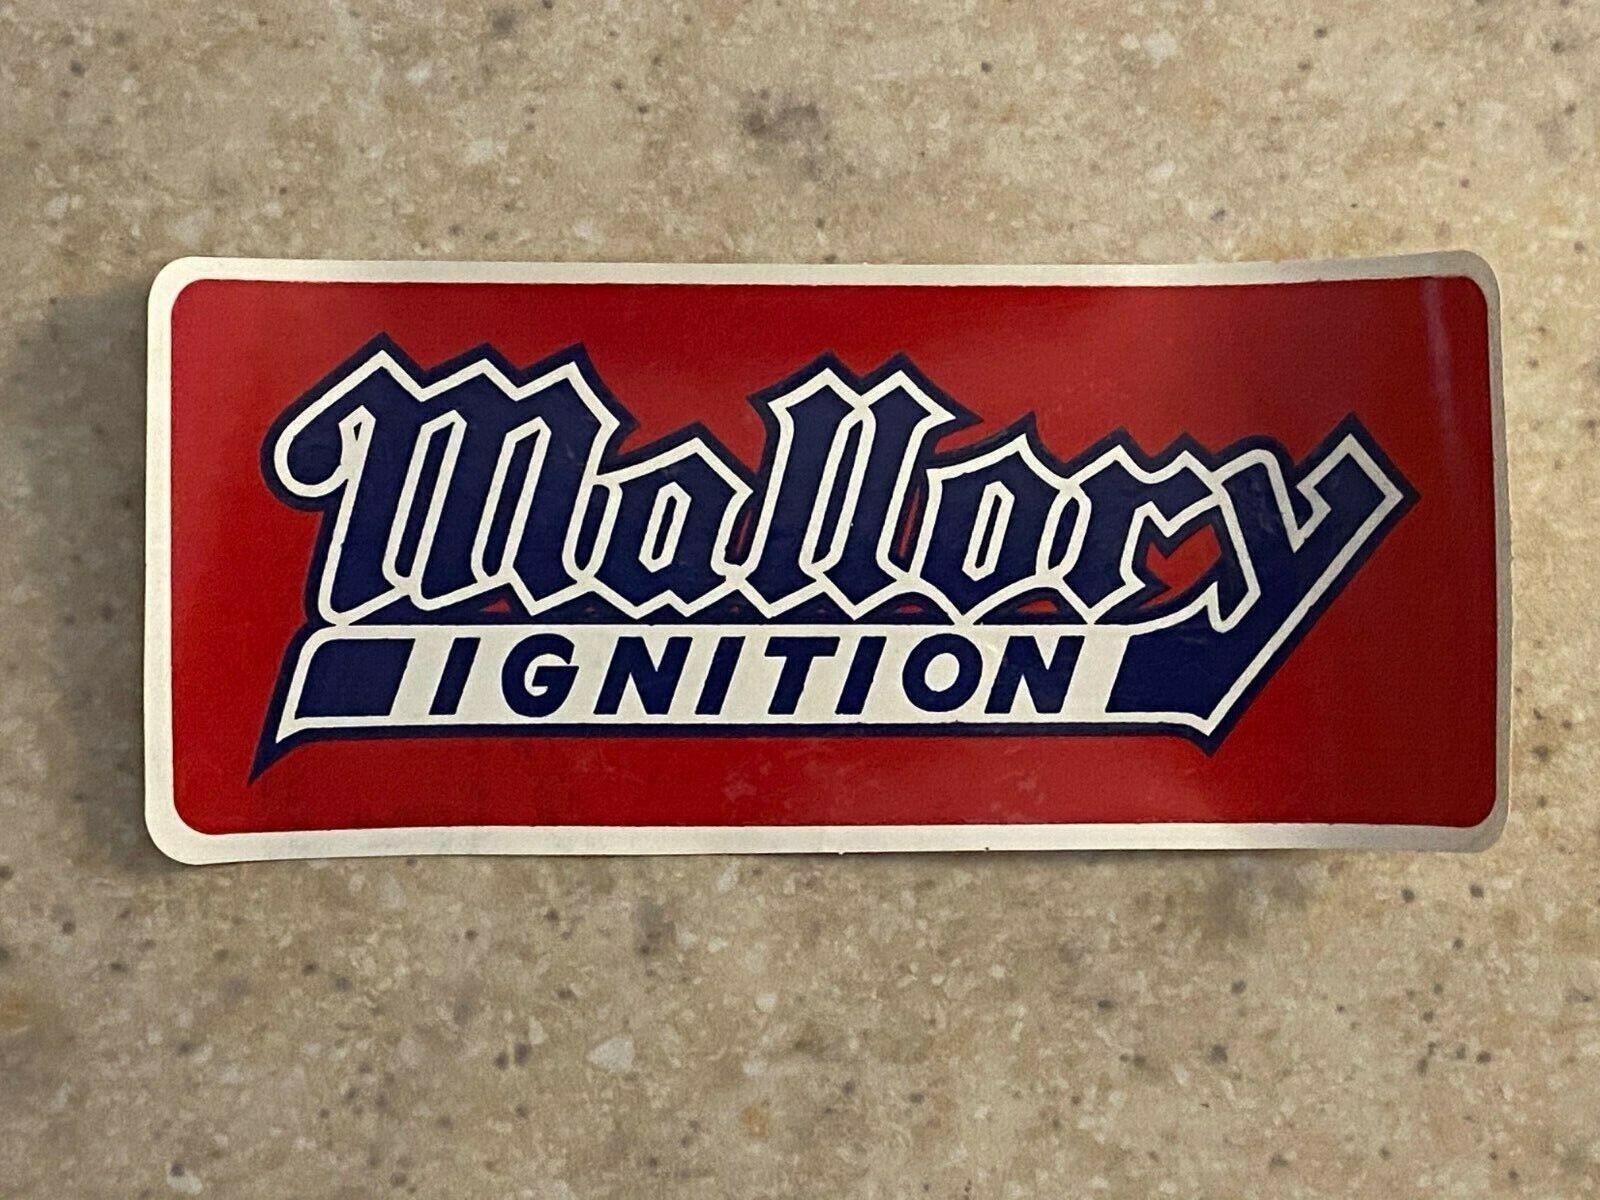 Mallory Ignition   -  Used Decal 